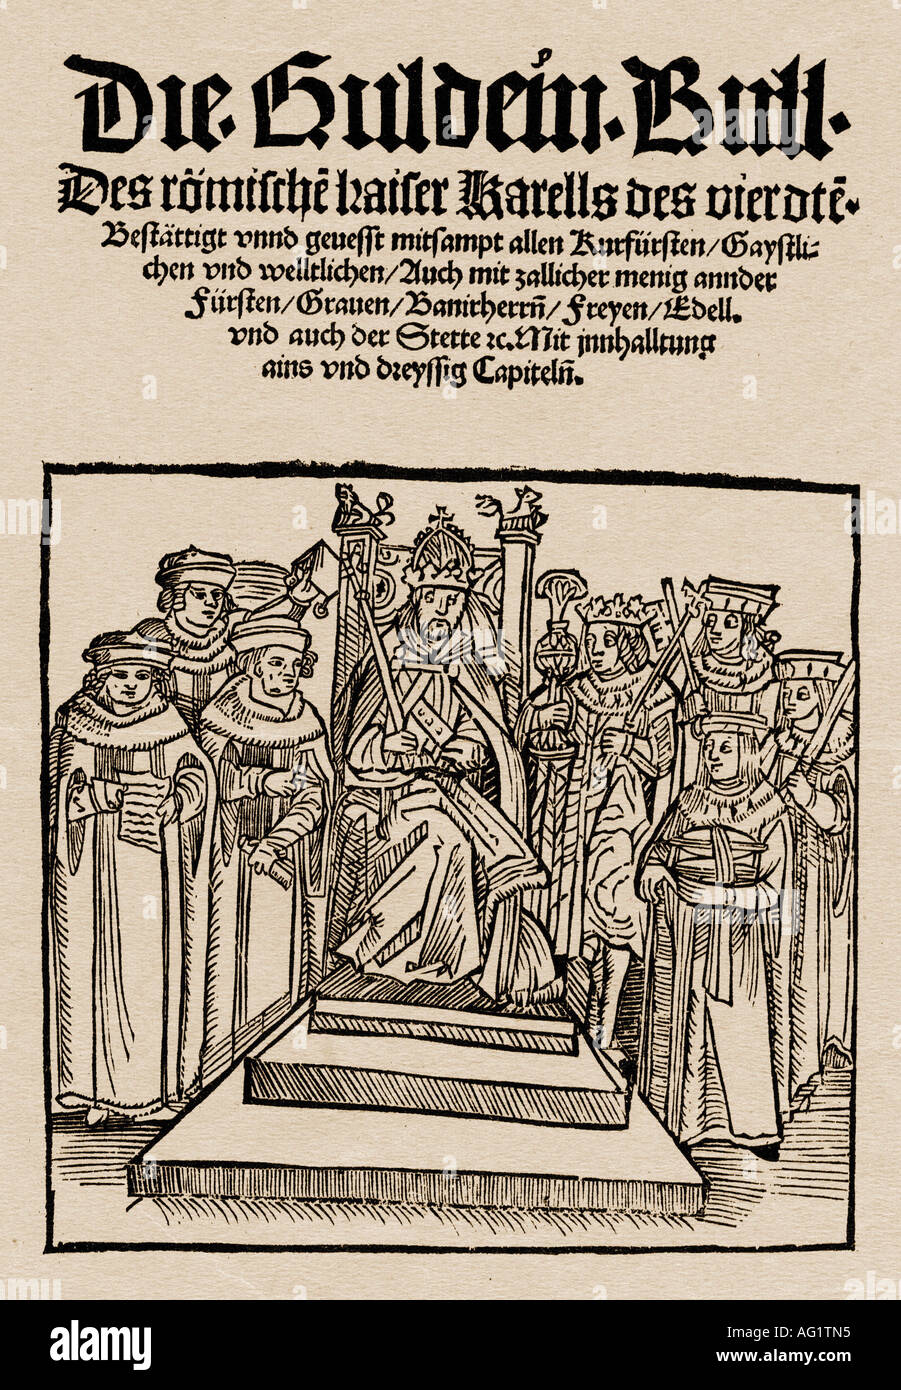 Charles IV, 14.5.1316 - 19.11.1378, Holy Roman Emperor 5.4.1355 - 19.11.1378, on the throne, woodcut, circa 15th century, print of the Golden Bull, electors, Count of Luxmebourg, King Karel I of Bohemia, Holy Roman Empire, middle ages, , Stock Photo